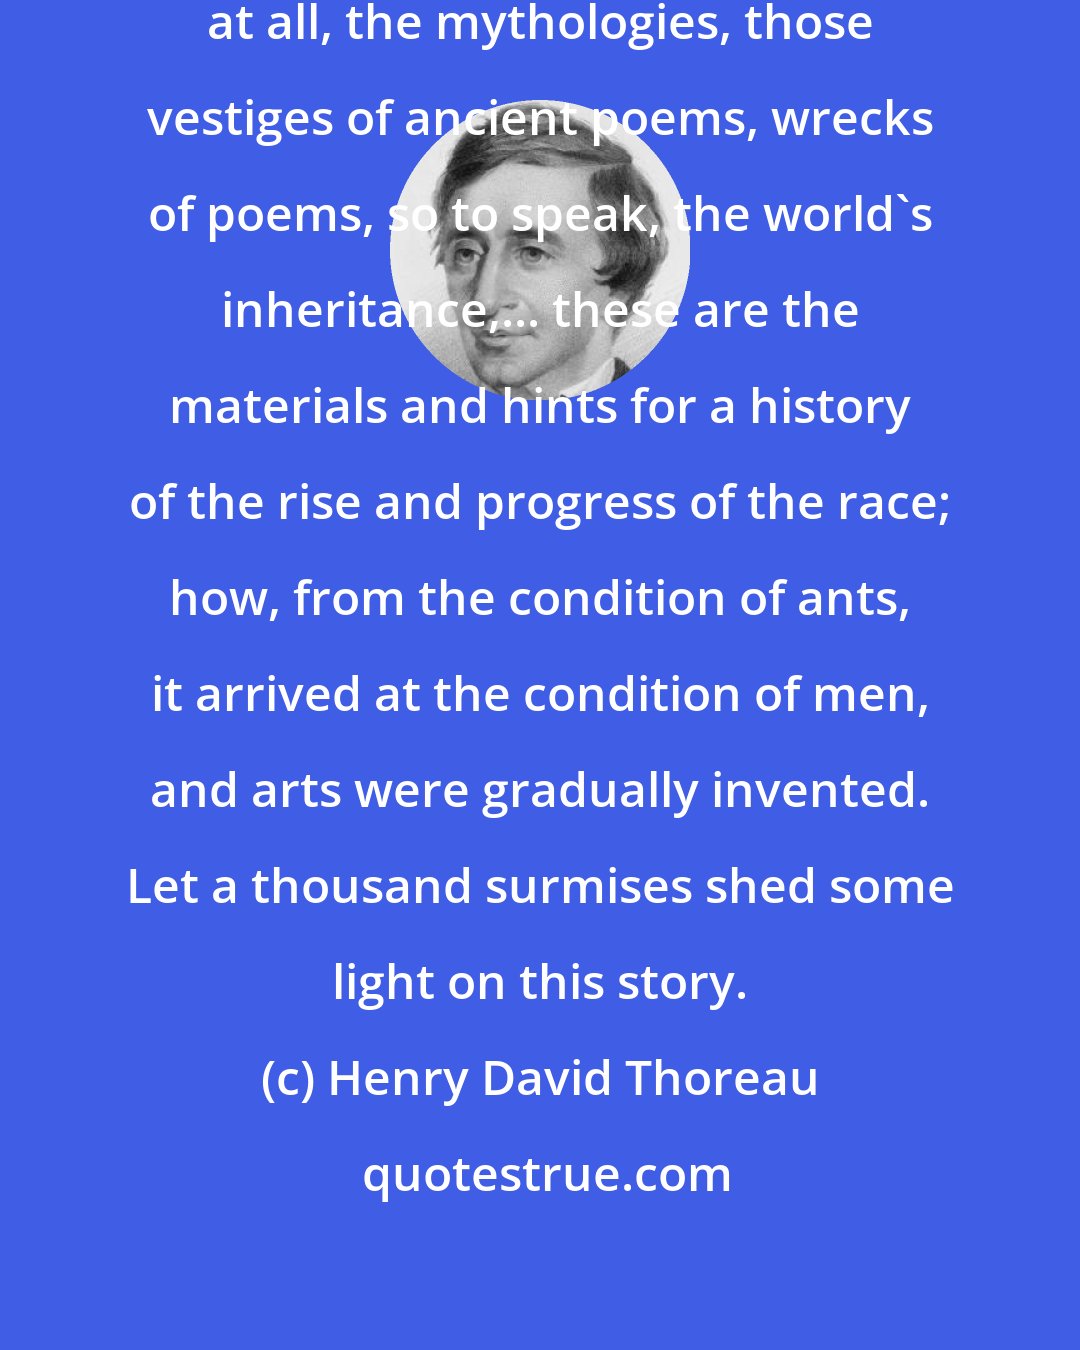 Henry David Thoreau: If we will admit time into our thoughts at all, the mythologies, those vestiges of ancient poems, wrecks of poems, so to speak, the world's inheritance,... these are the materials and hints for a history of the rise and progress of the race; how, from the condition of ants, it arrived at the condition of men, and arts were gradually invented. Let a thousand surmises shed some light on this story.